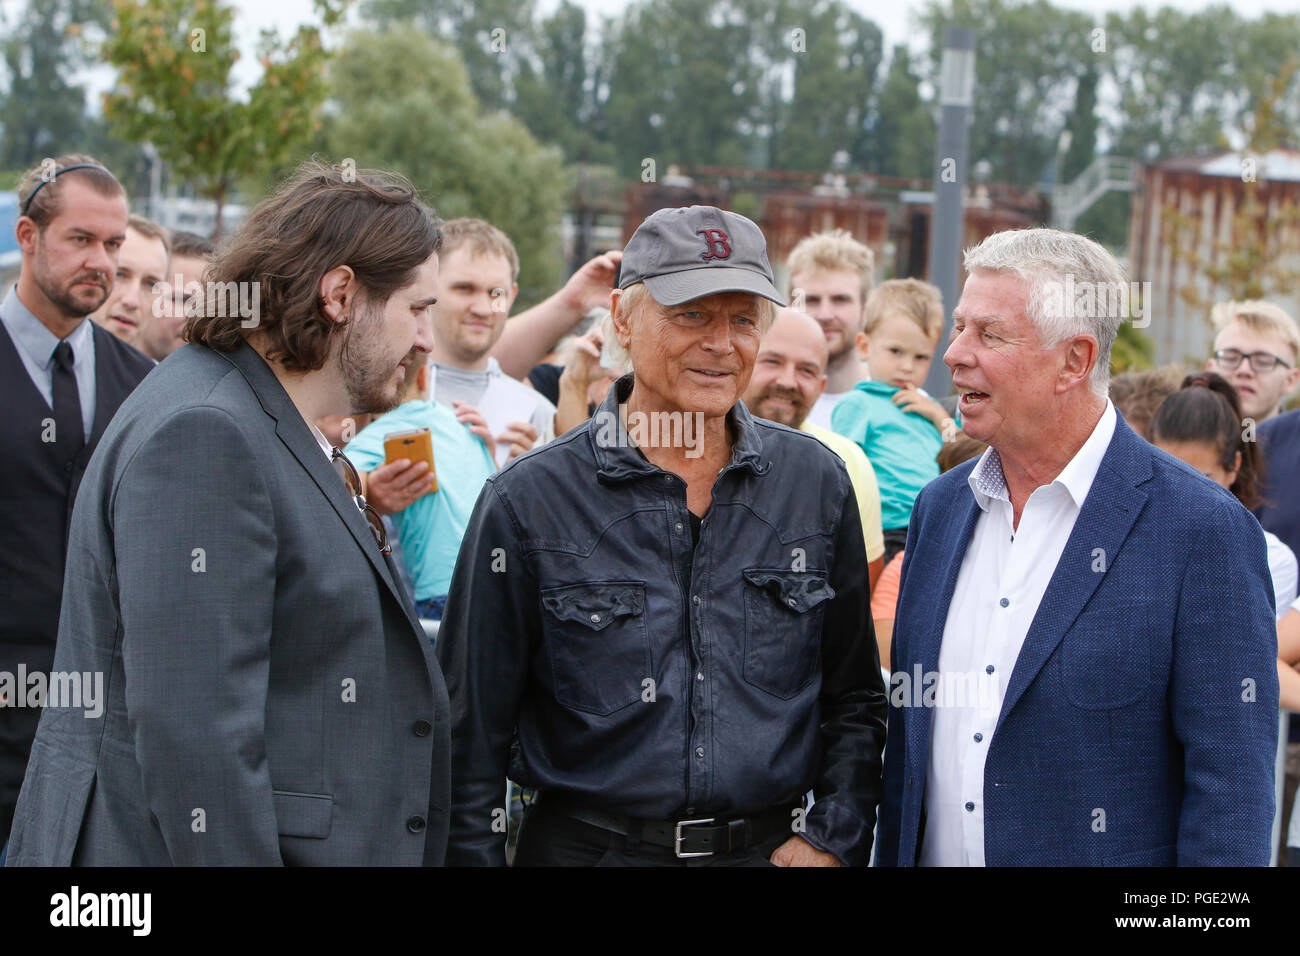 Worms, Germany. 24th Aug, 2018. Actor Peter Englert, who initiated the renaming of the bridge to Terence-Hill-Bridge, Terence Hill and the Lord Mayor of Worms Michael Kissel are pictured from left to right. Italian actor Terence Hill visited the German city of Worms, to present his new movie (My Name is somebody). Terence Hill added the stop in Worms to his movie promotion tour in Germany, to visit a pedestrian bridge, that is unofficially named Terence-Hill-Bridge (officially Karl-Kubel-Bridge). Credit: Michael Debets/Pacific Press/Alamy Live News Stock Photo